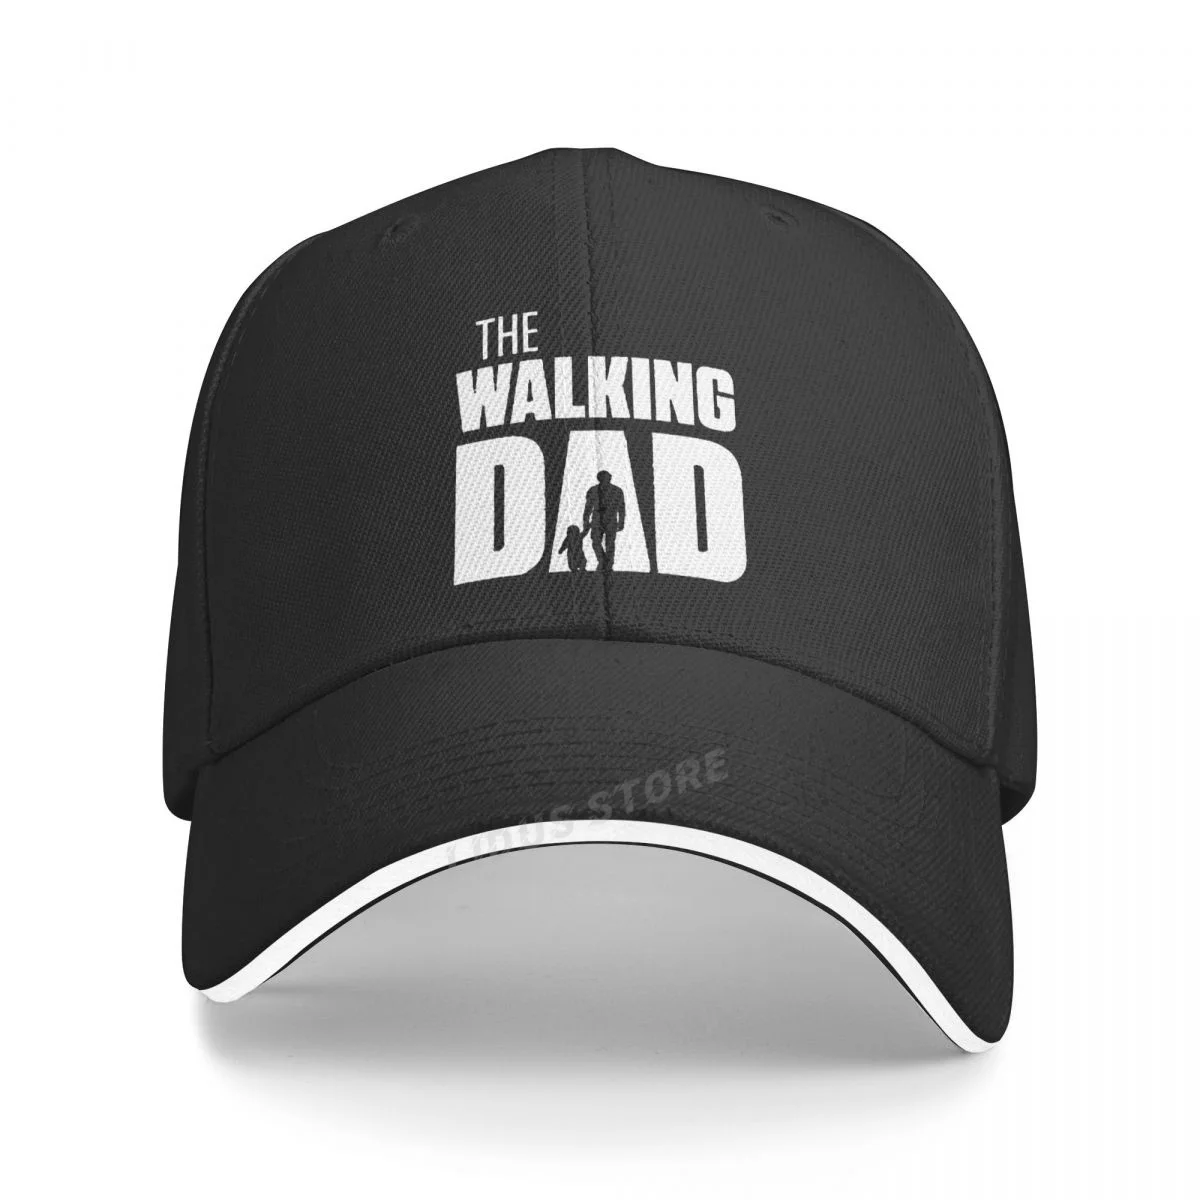 The Walking Dad Hat Men Casual Cotton Father's Day Baseball Cap Fashion Brand Men Funny Dad Gift Snapback Hats